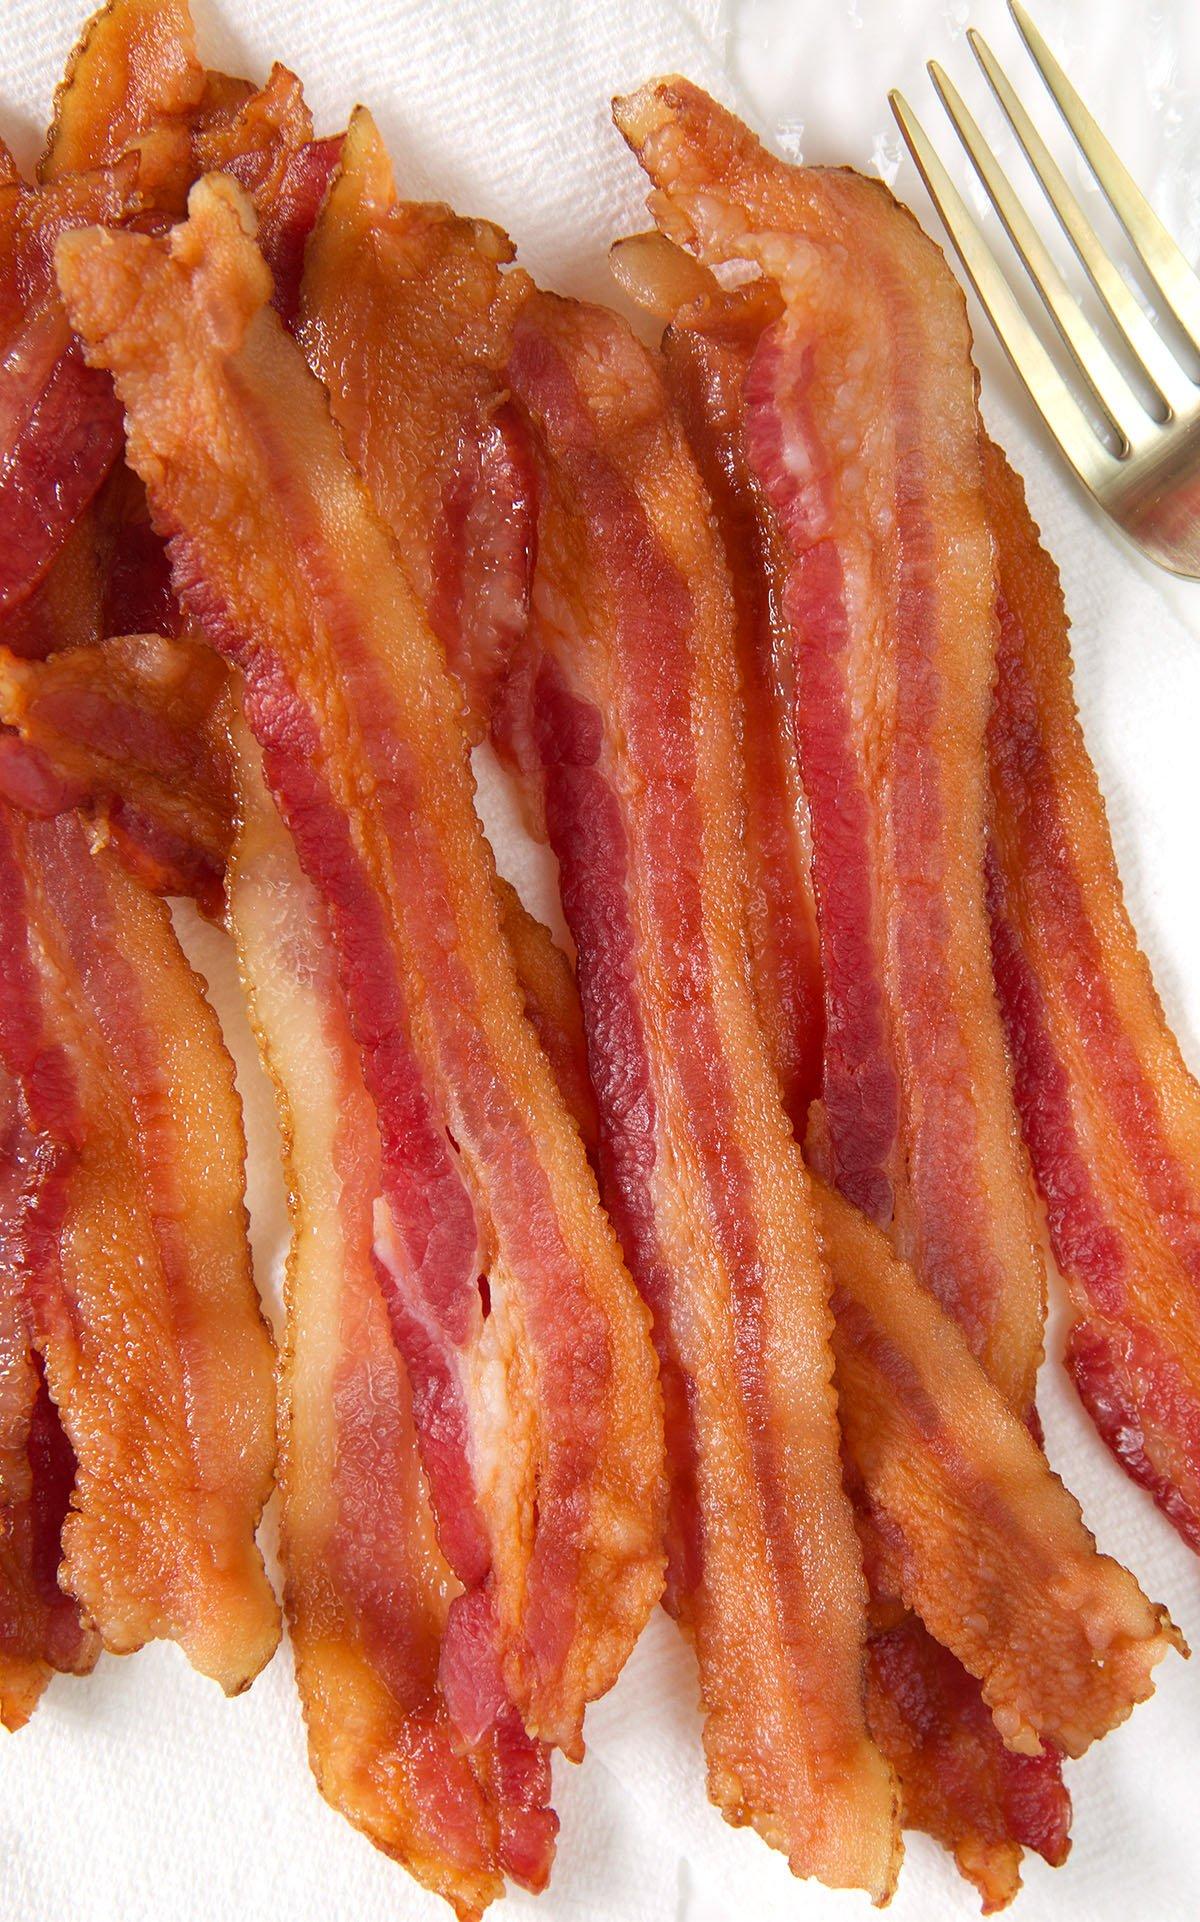 A sheet of paper towels is topped with cooked bacon and a single fork.